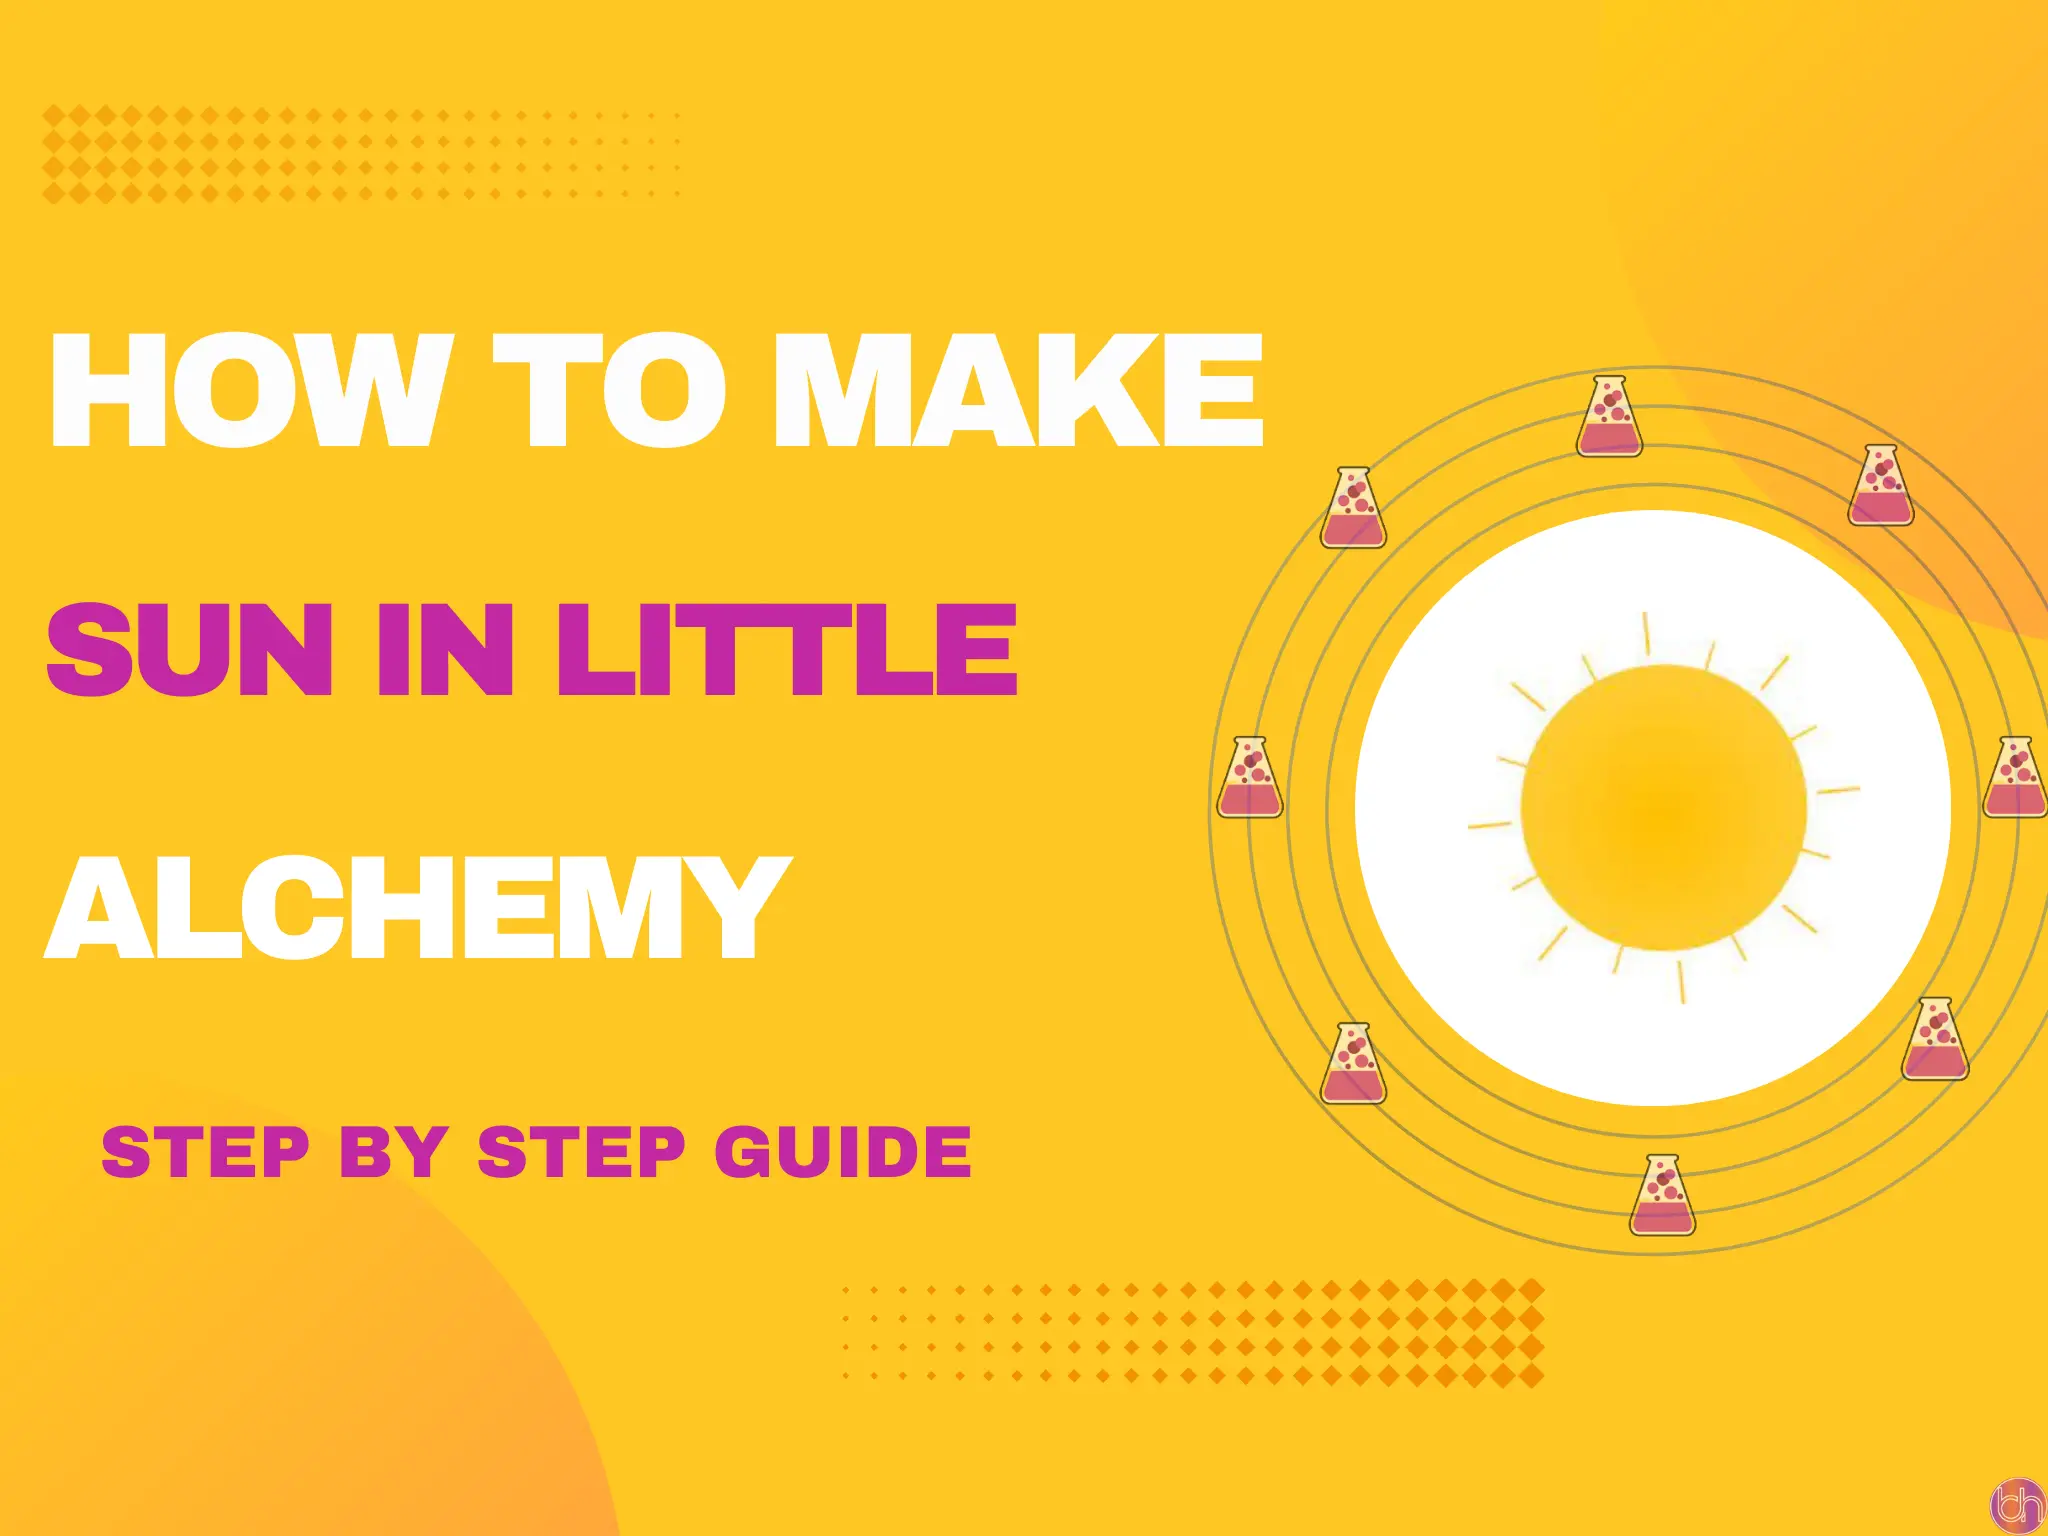 How to make Sun in little alchemy